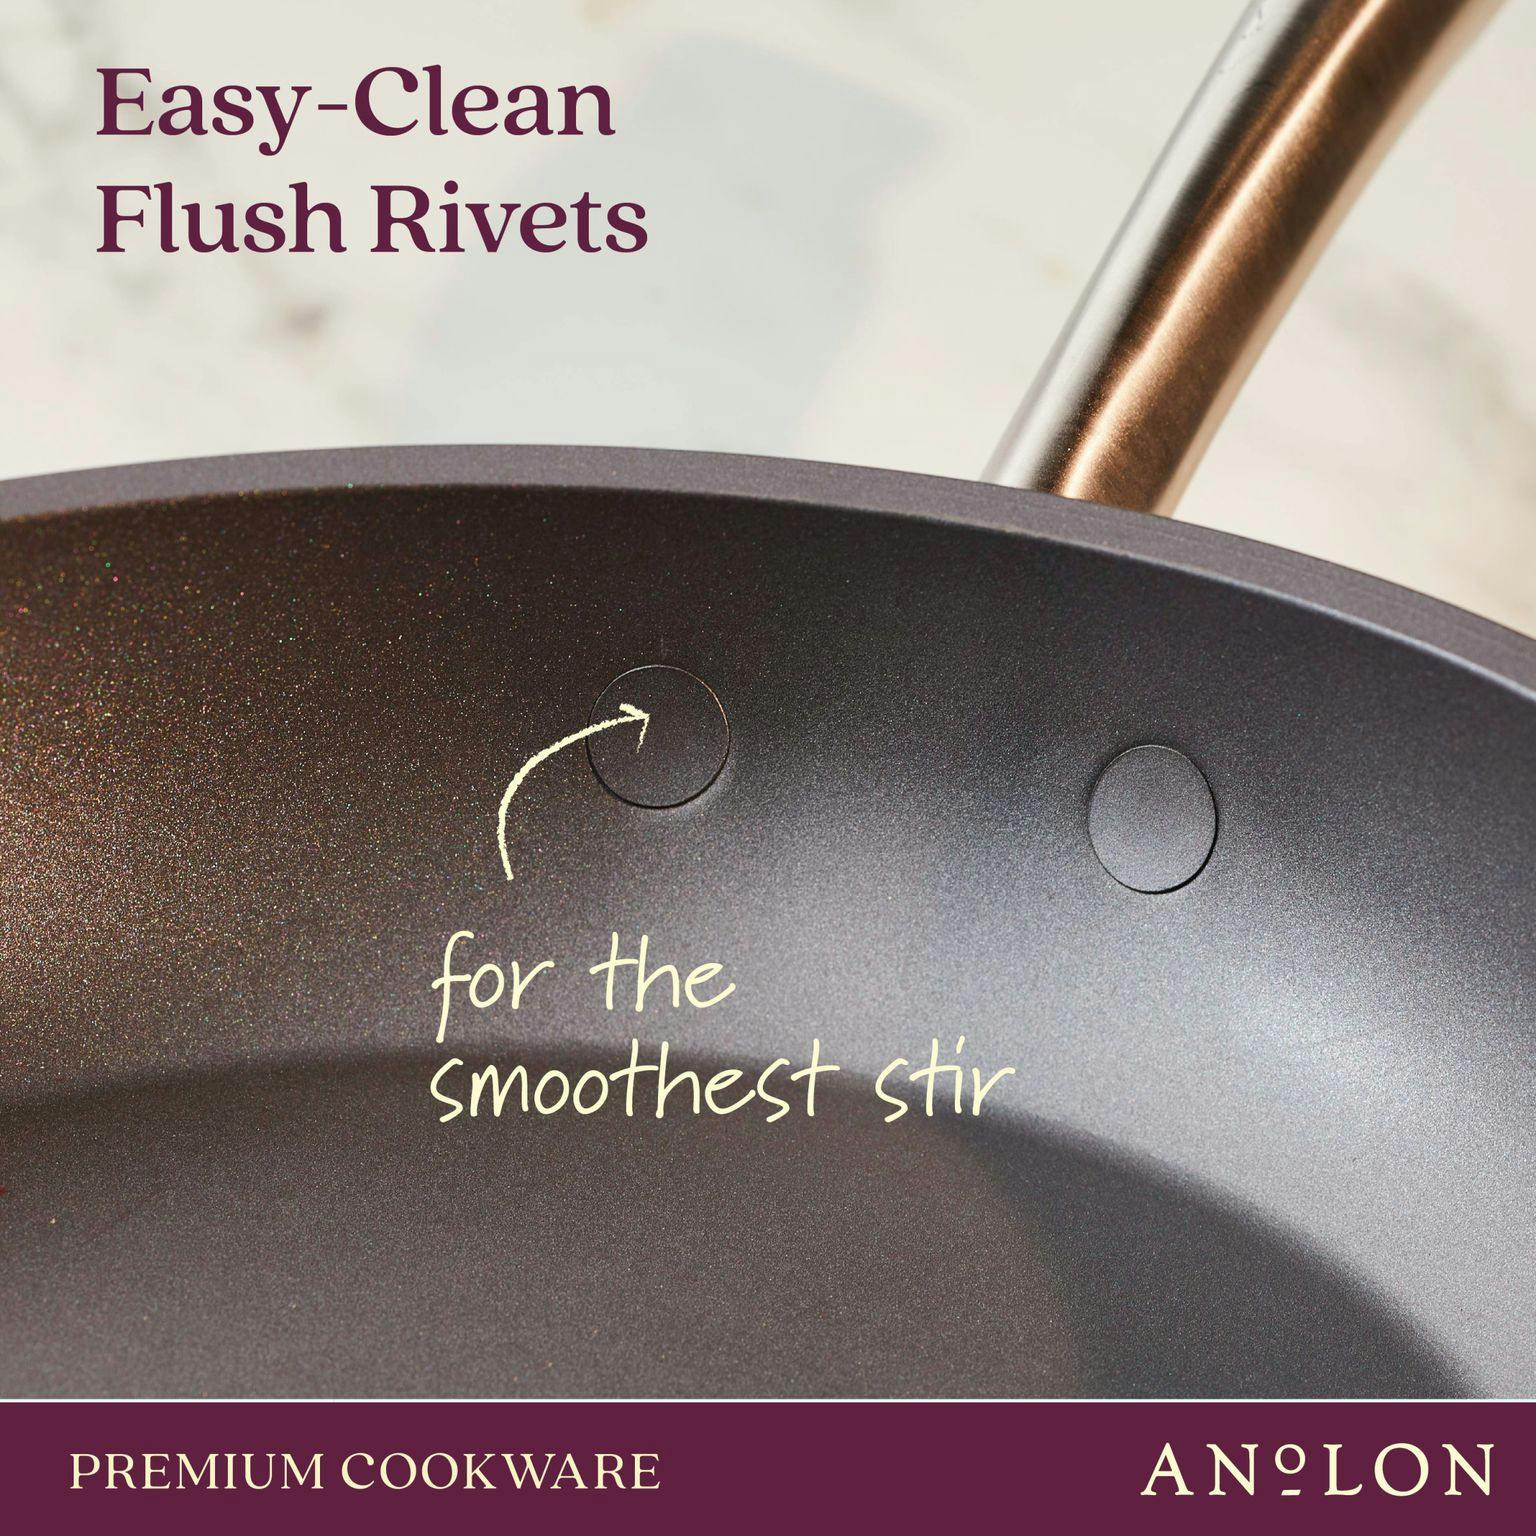 Anolon Accolade Forged Hard-Anodized Nonstick Induction Frying Pan Set, 2-Piece, Moonstone